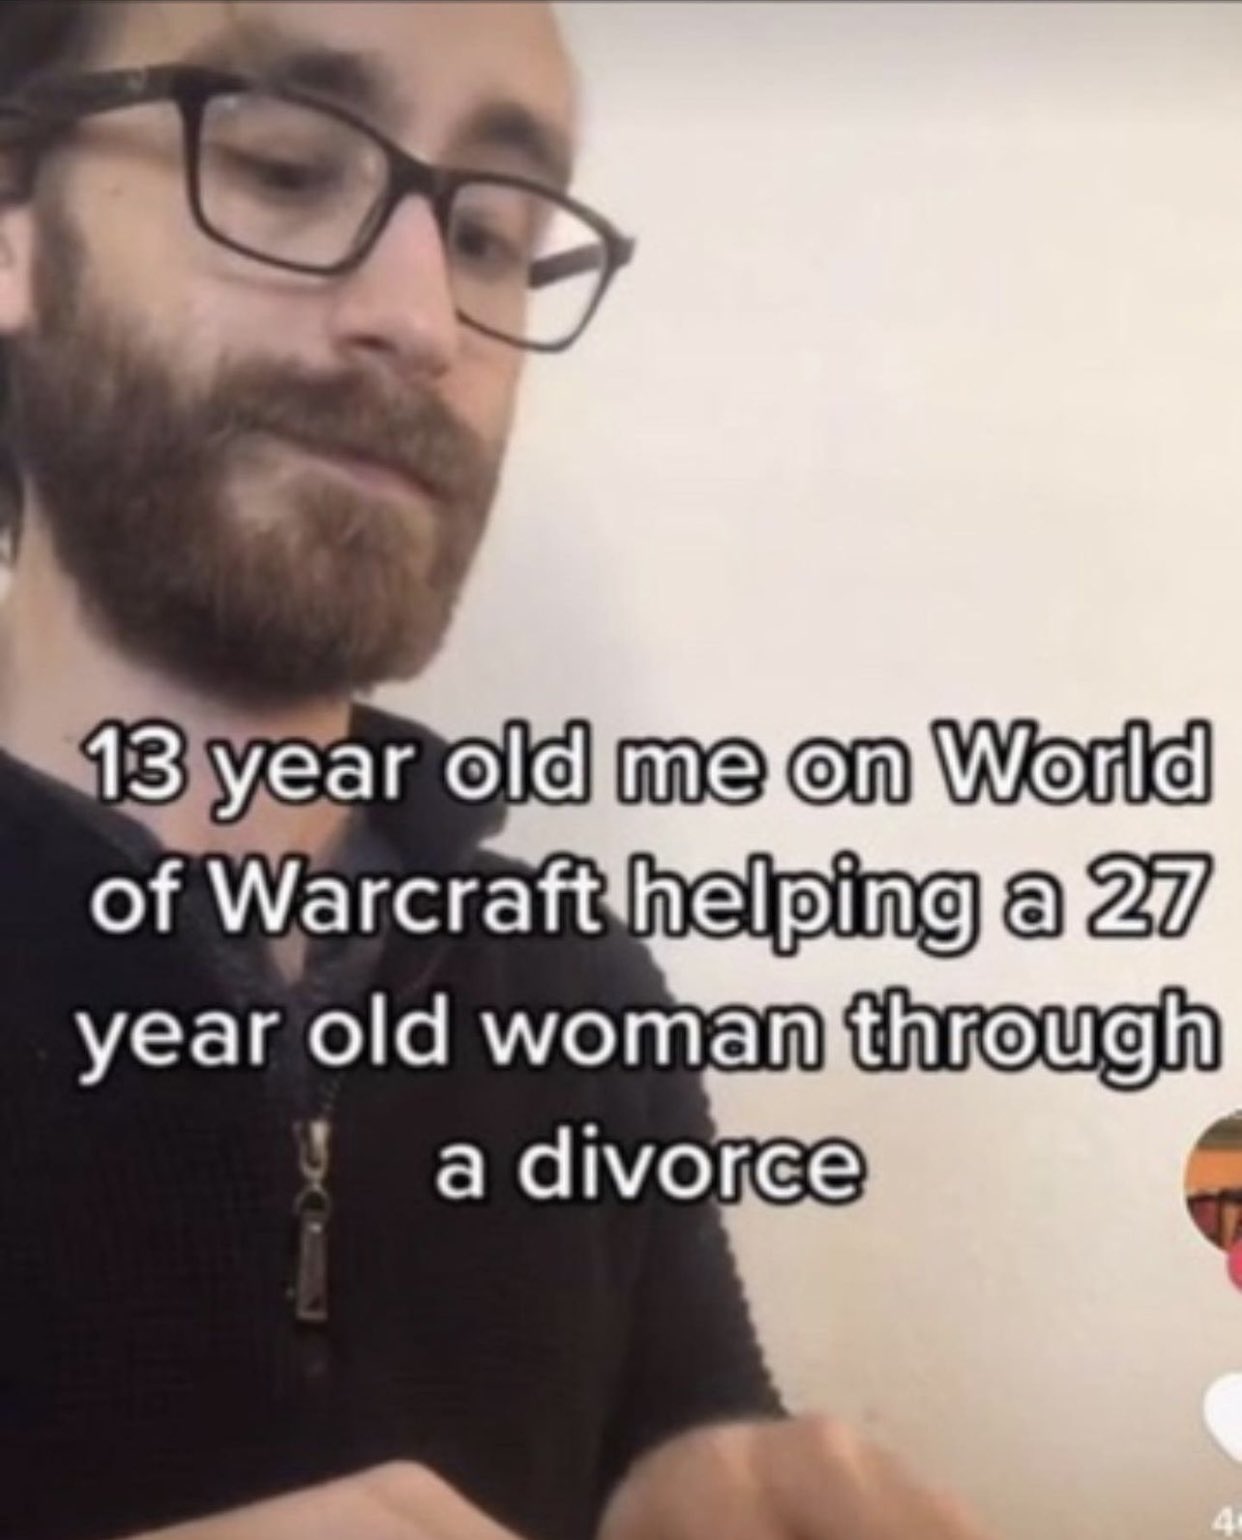 dudes posting their Ws - beard - 13 year old me on World of Warcraft helping a 27 year old woman through a divorce